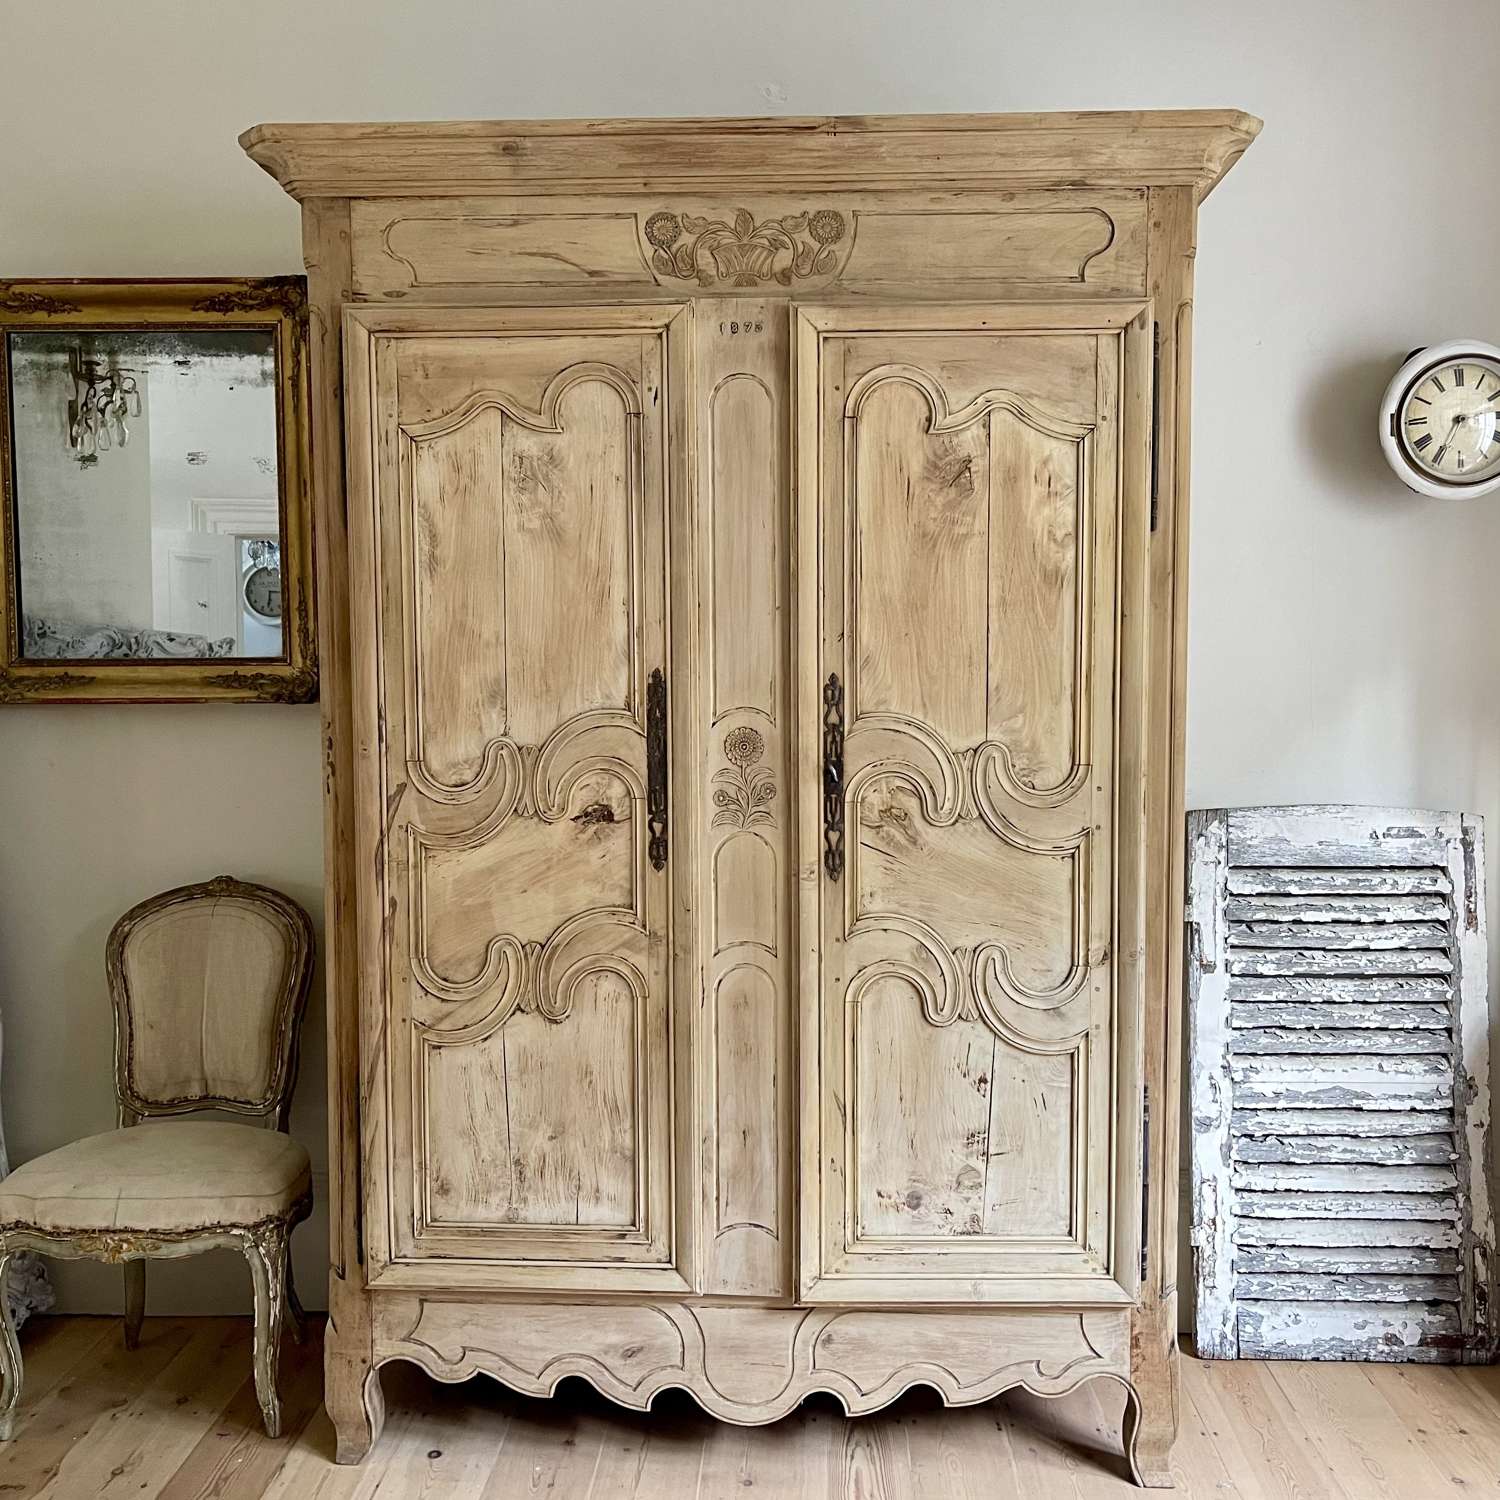 19th century French armoire with hanging rail - 1873